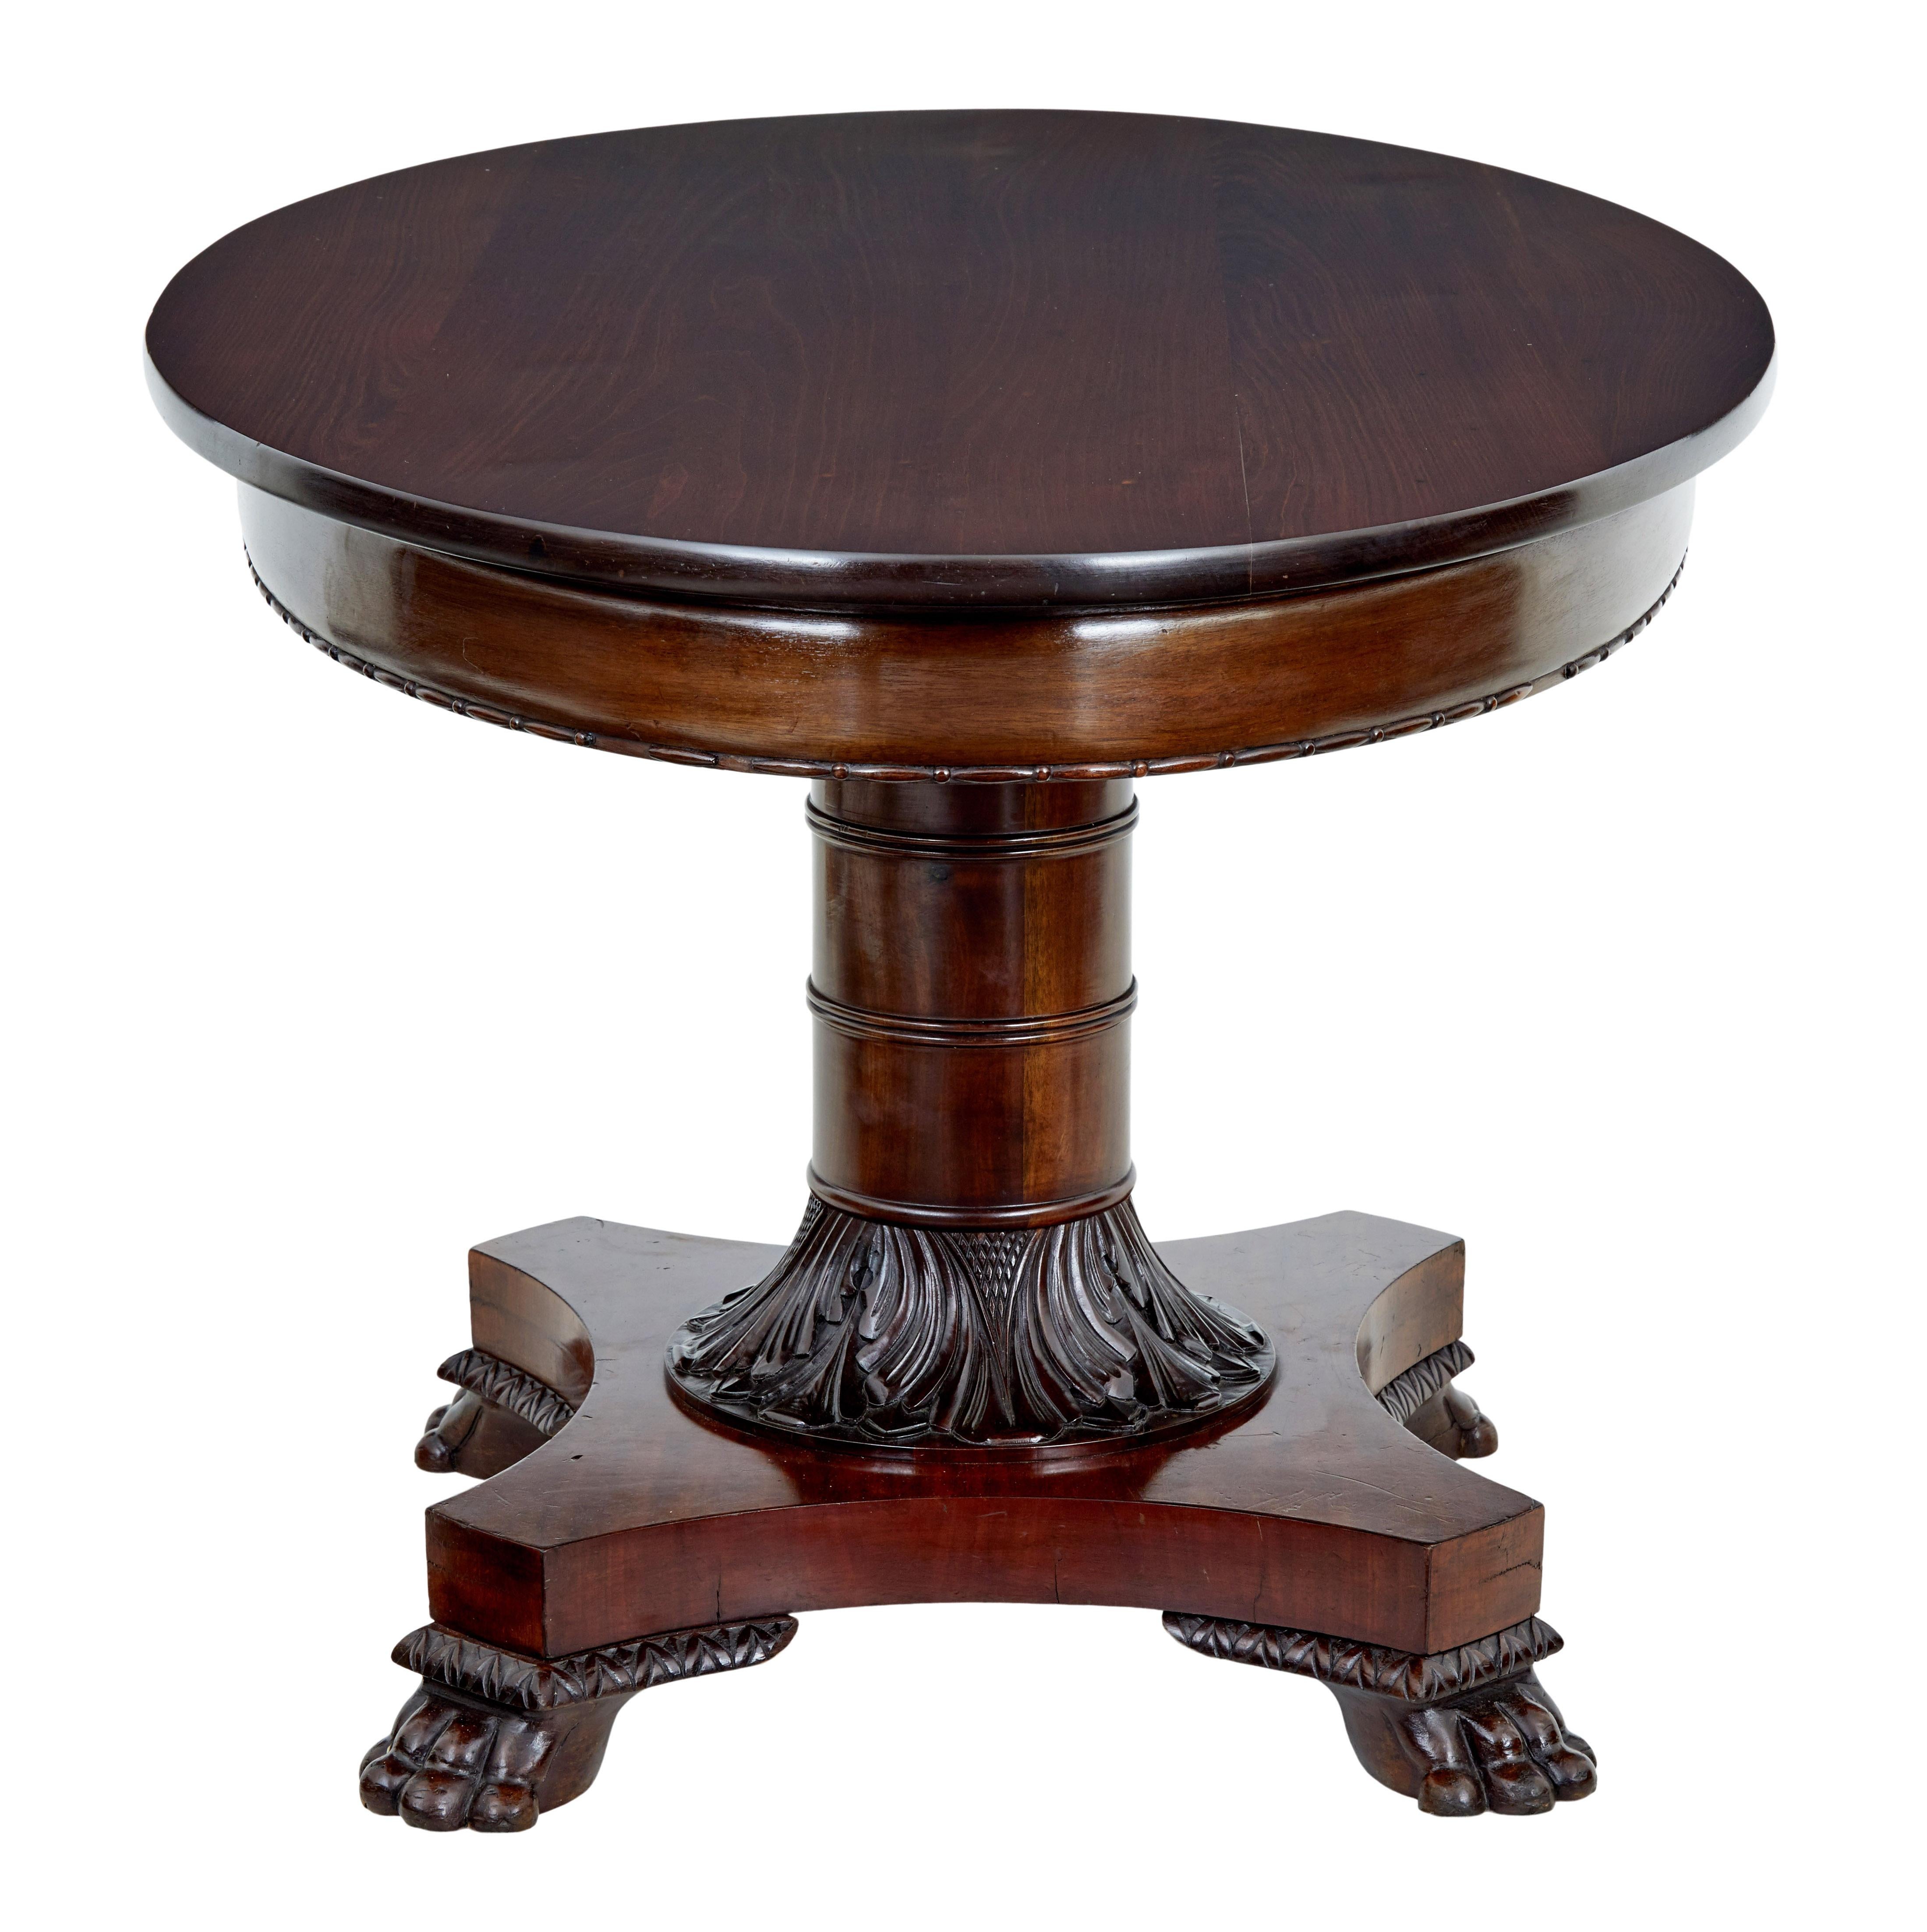 Fine quality oval mahogany center table, circa 1860.

Solid mahogany top with applied carved detail to the frieze. Standing on a fantastic gun barrel stem base, carved collar links to the quadriform. Standing on carved paw feet.

Top surface has